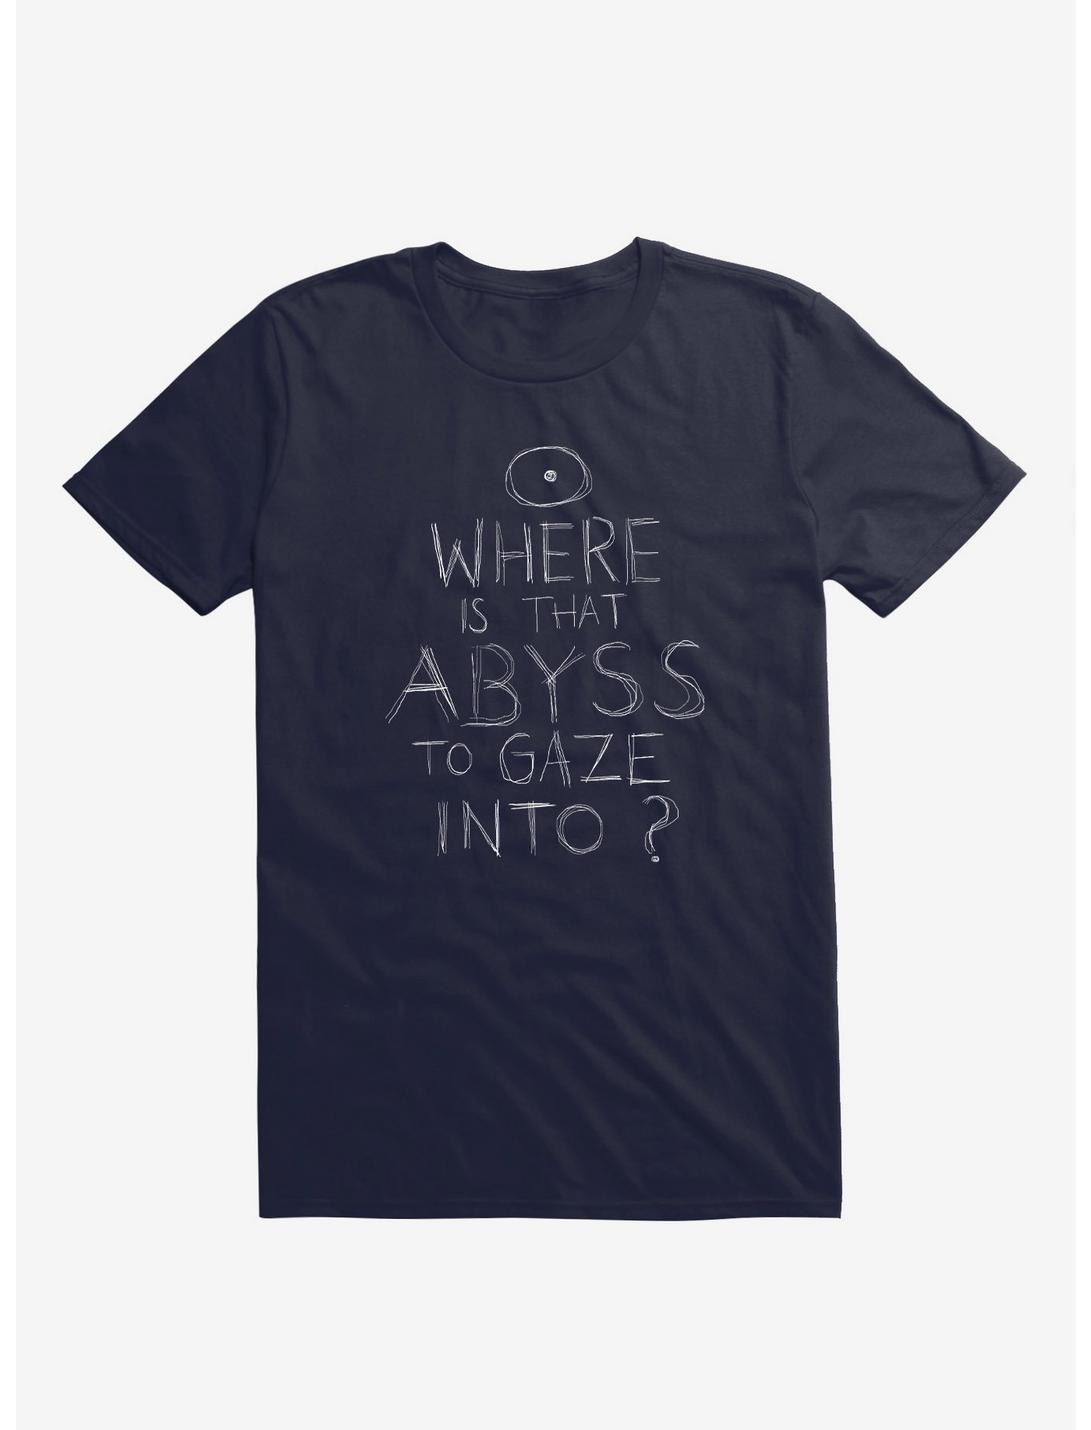 Where Is That Abyss To Gaze Into? T-Shirt, NAVY, hi-res